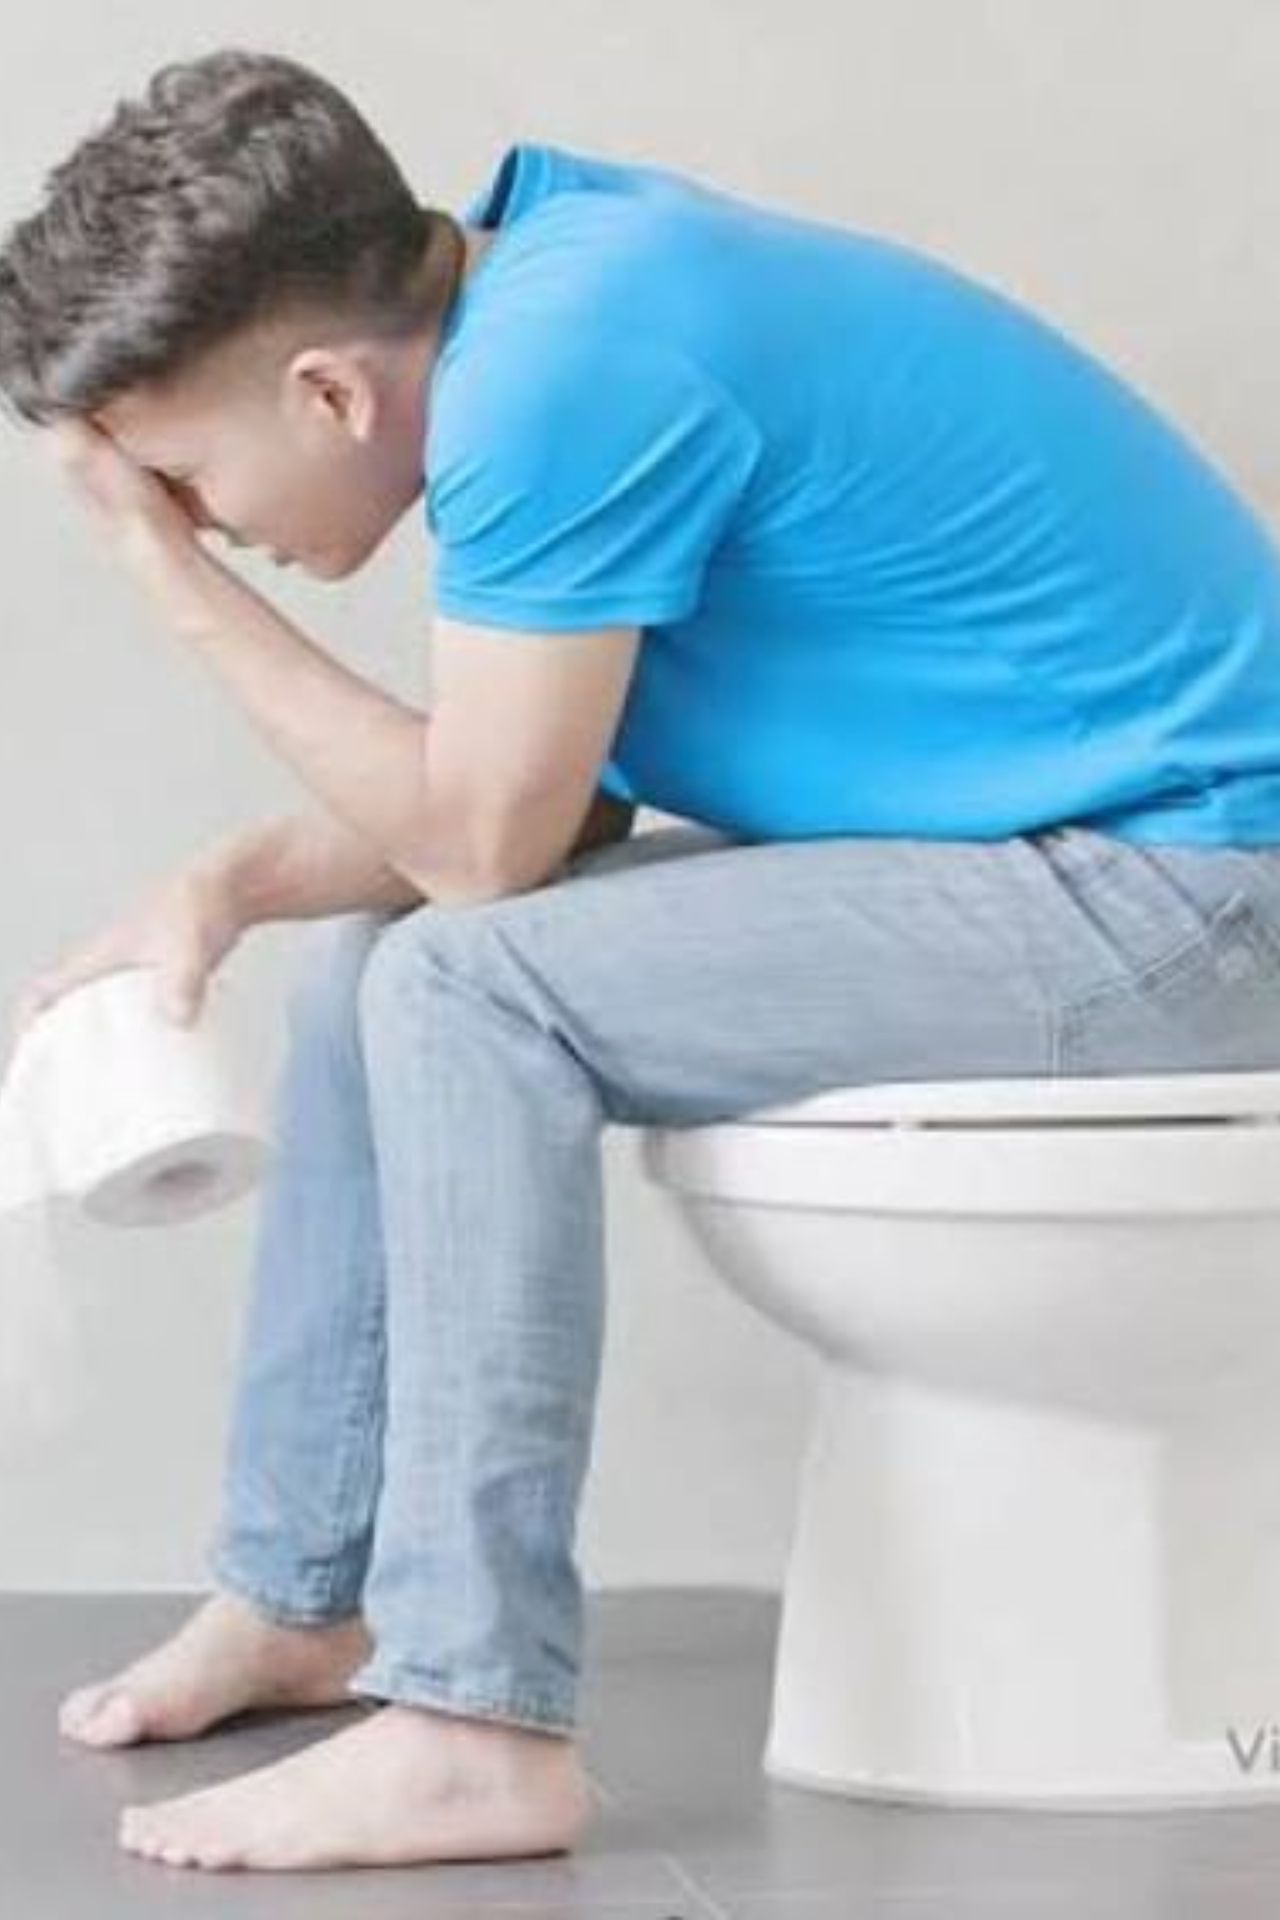 List of food items that can solve your constipation problems 